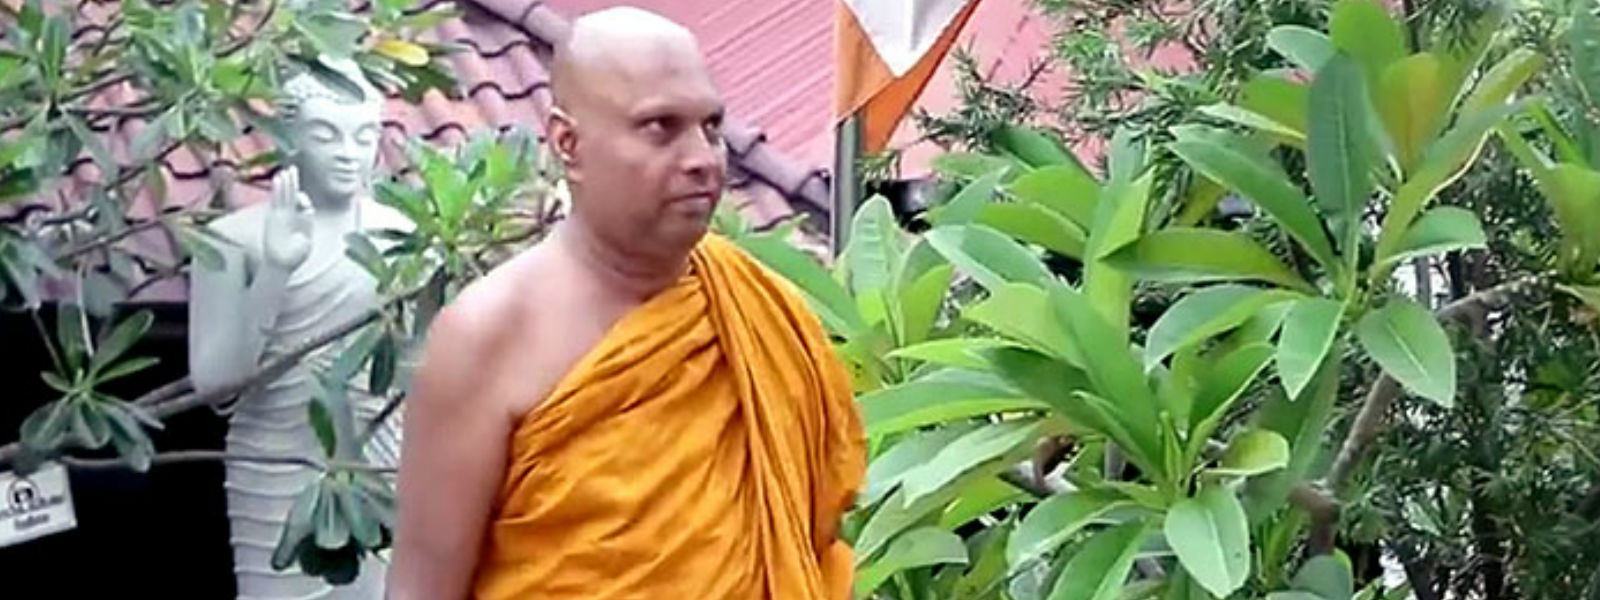 Final rites of Ven. Kusaldhamma Thero to be held